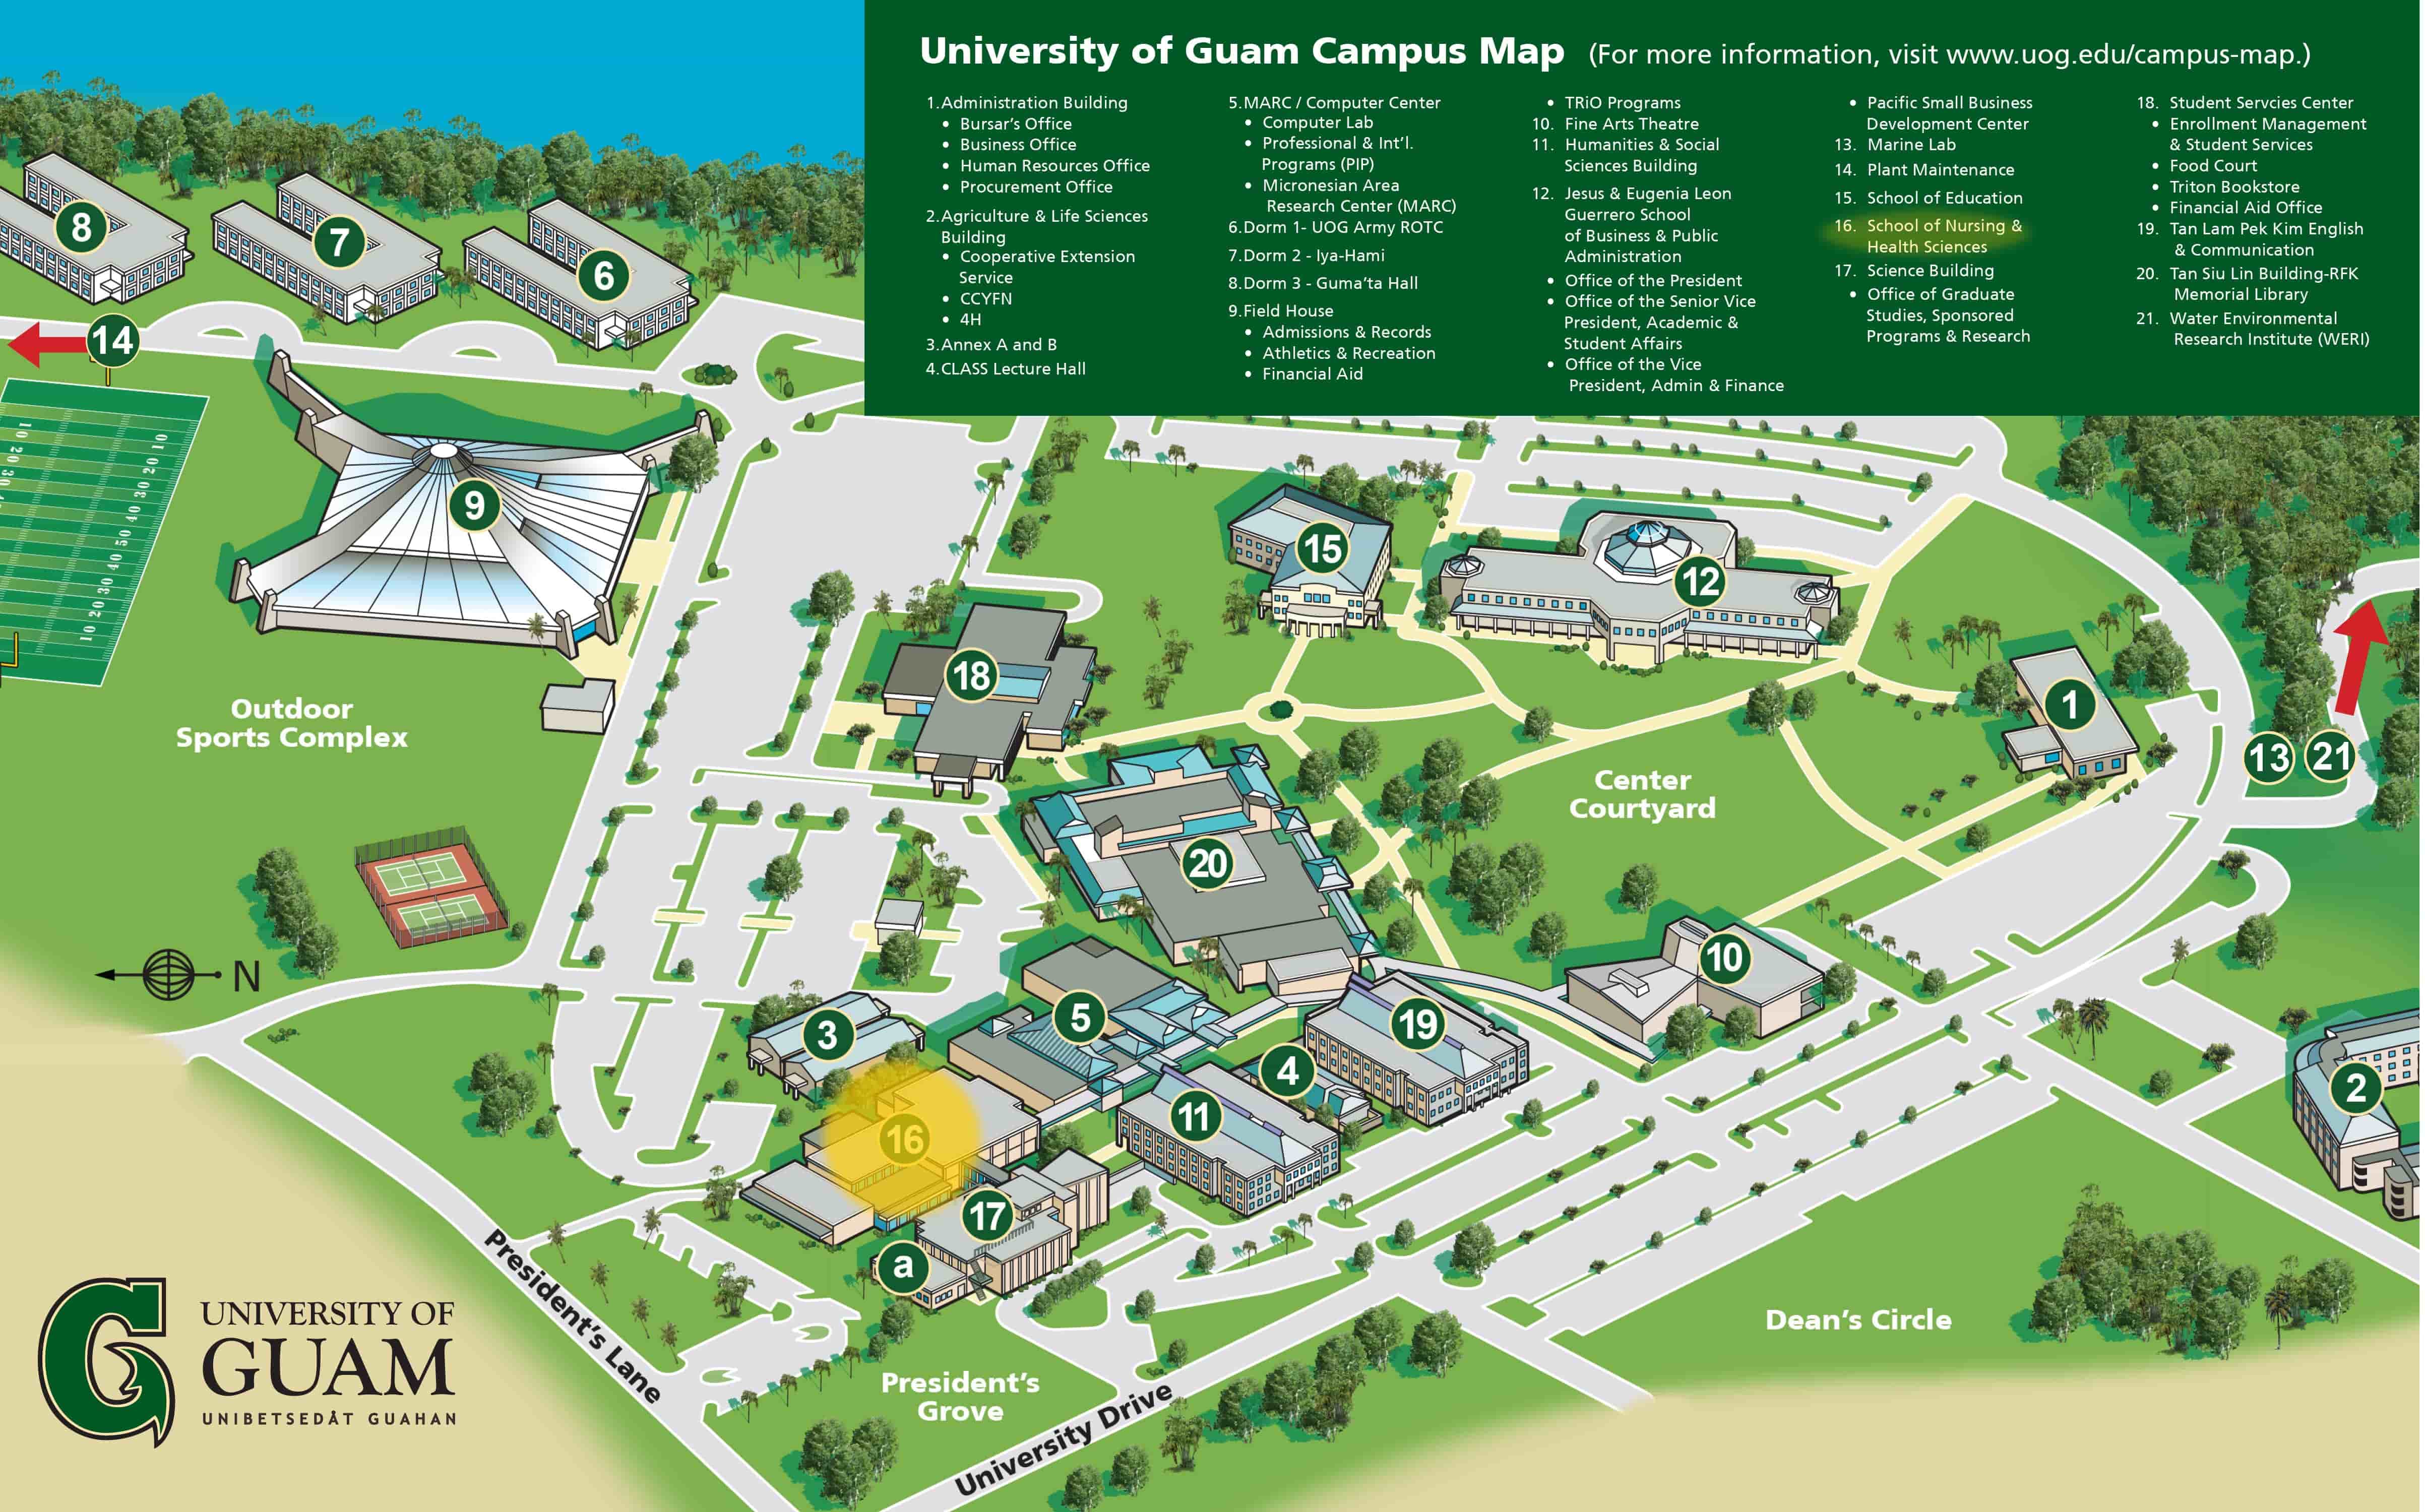 UOG Campus Map with School of Health highlighted